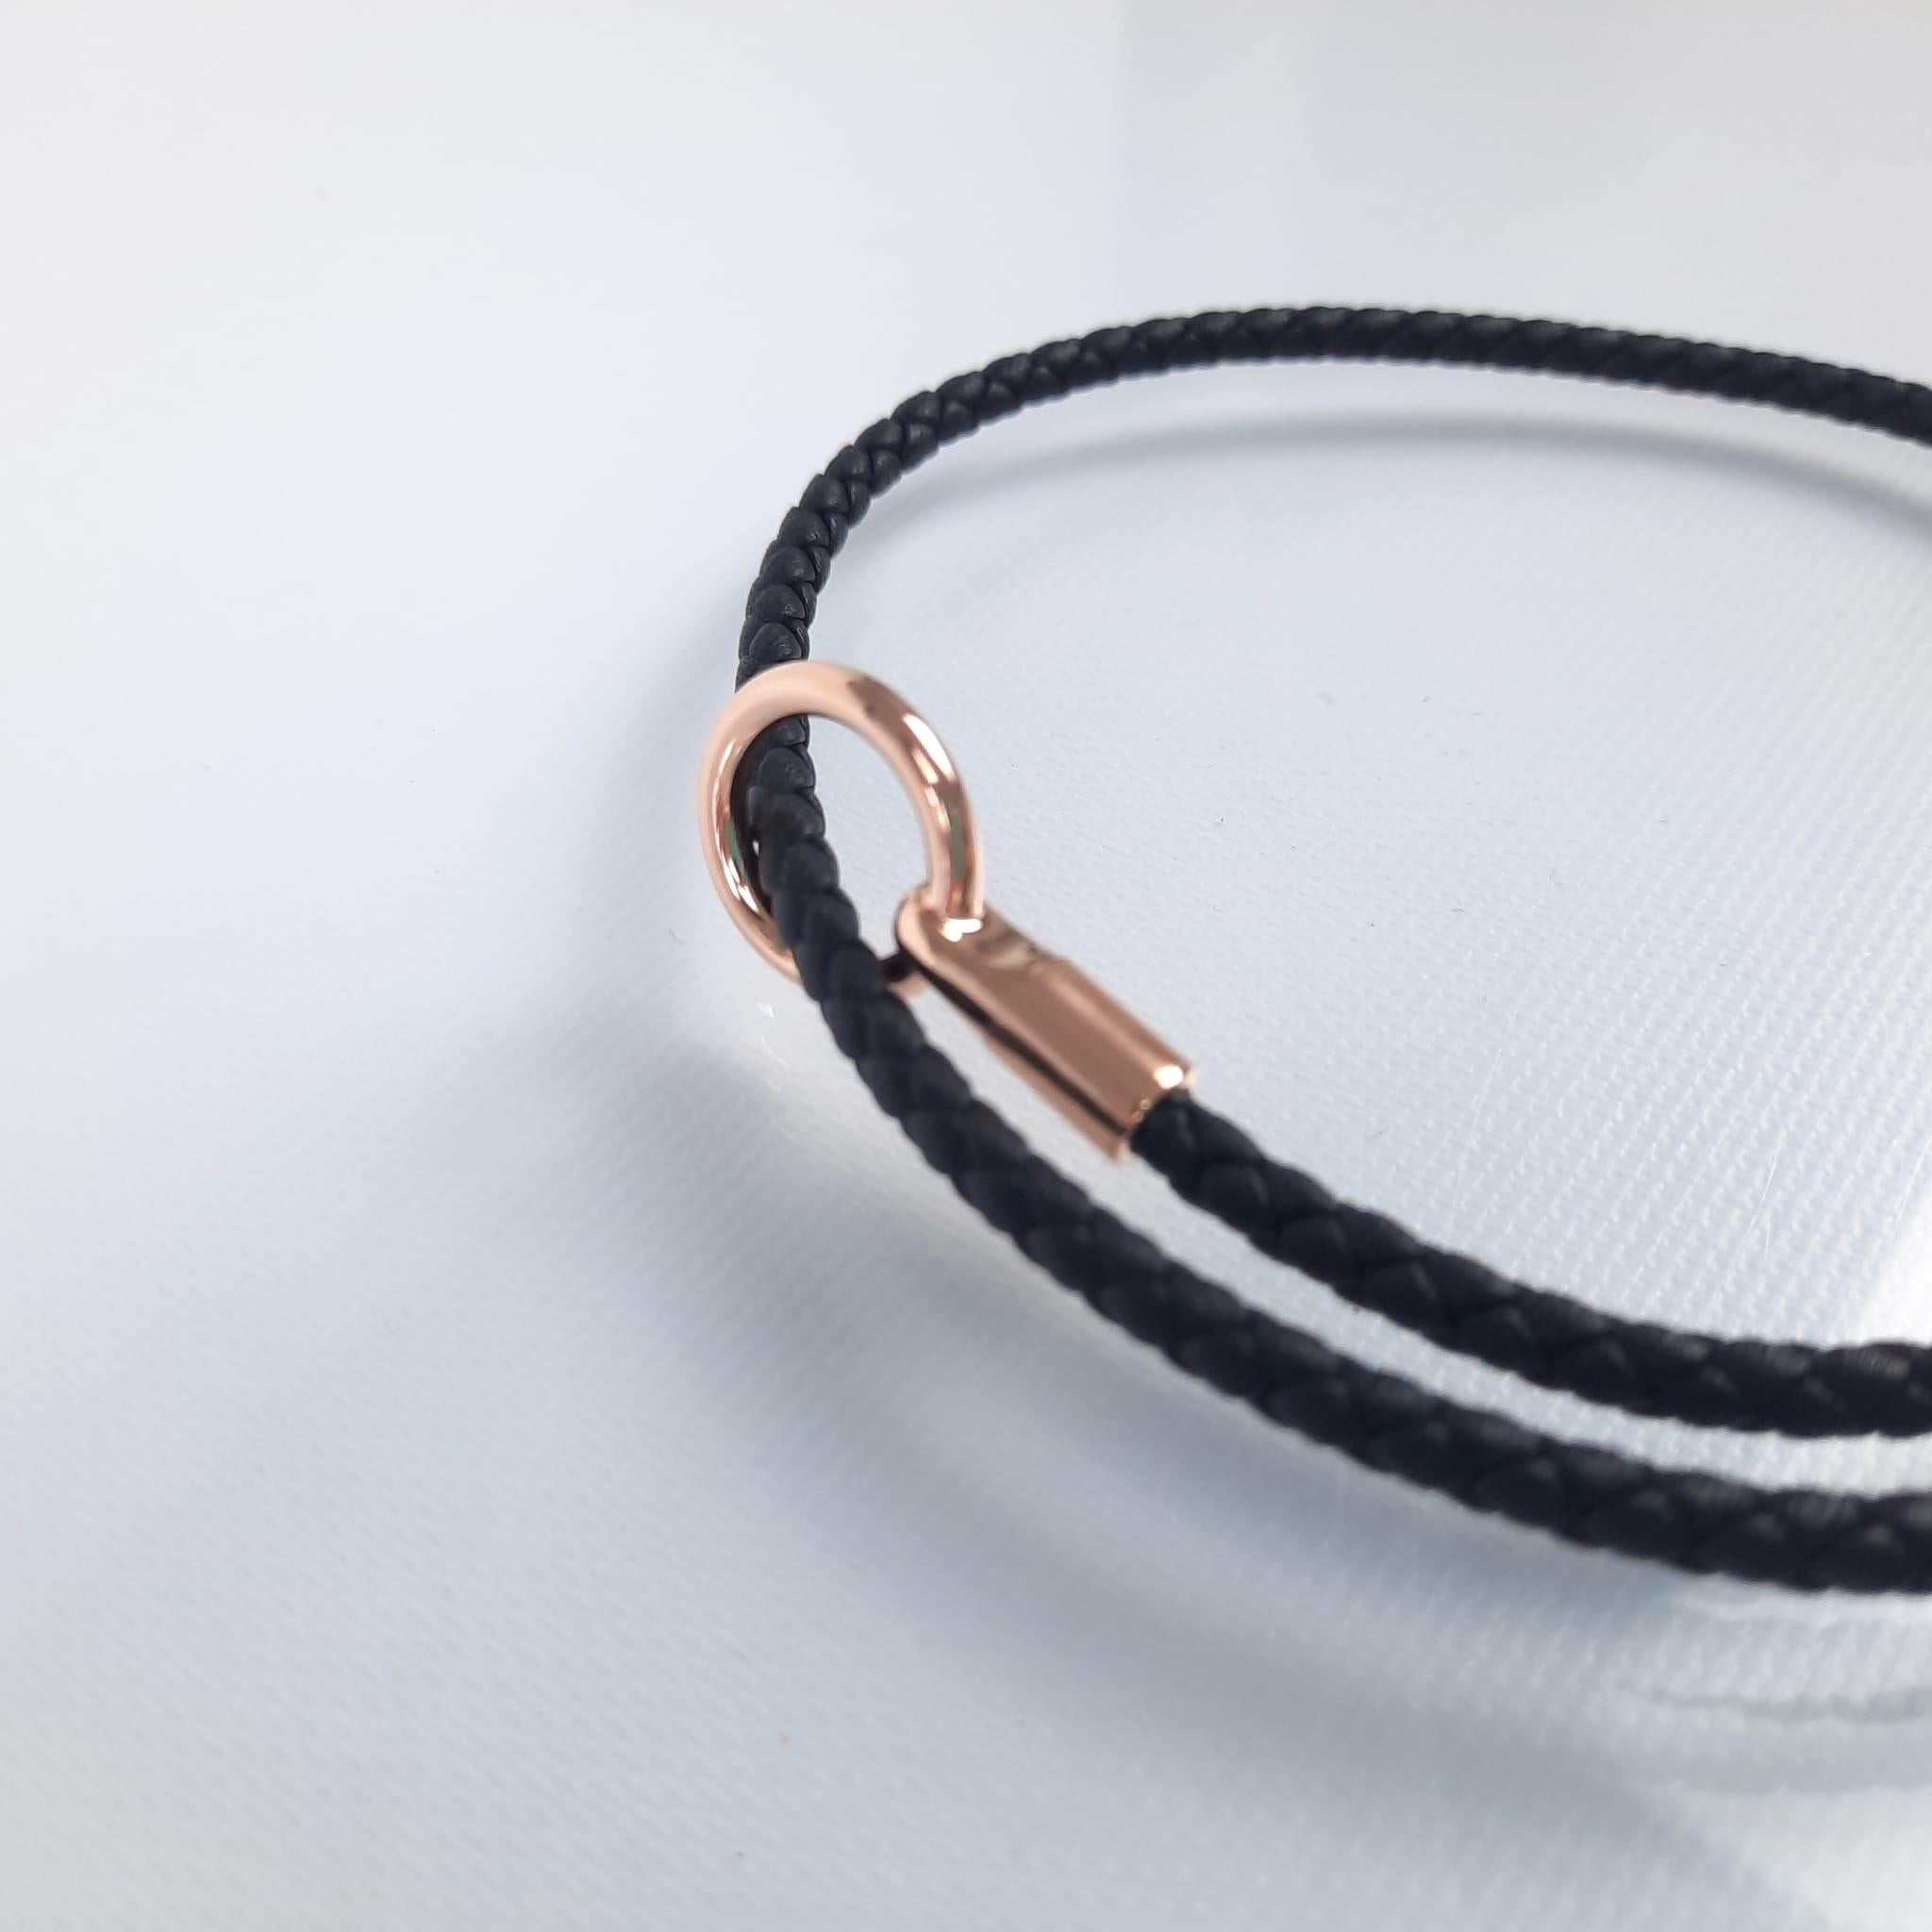 Braided bracelet in Swift calfskin with rose Gold-plated. Size T2
Braid width: 0.3 cm